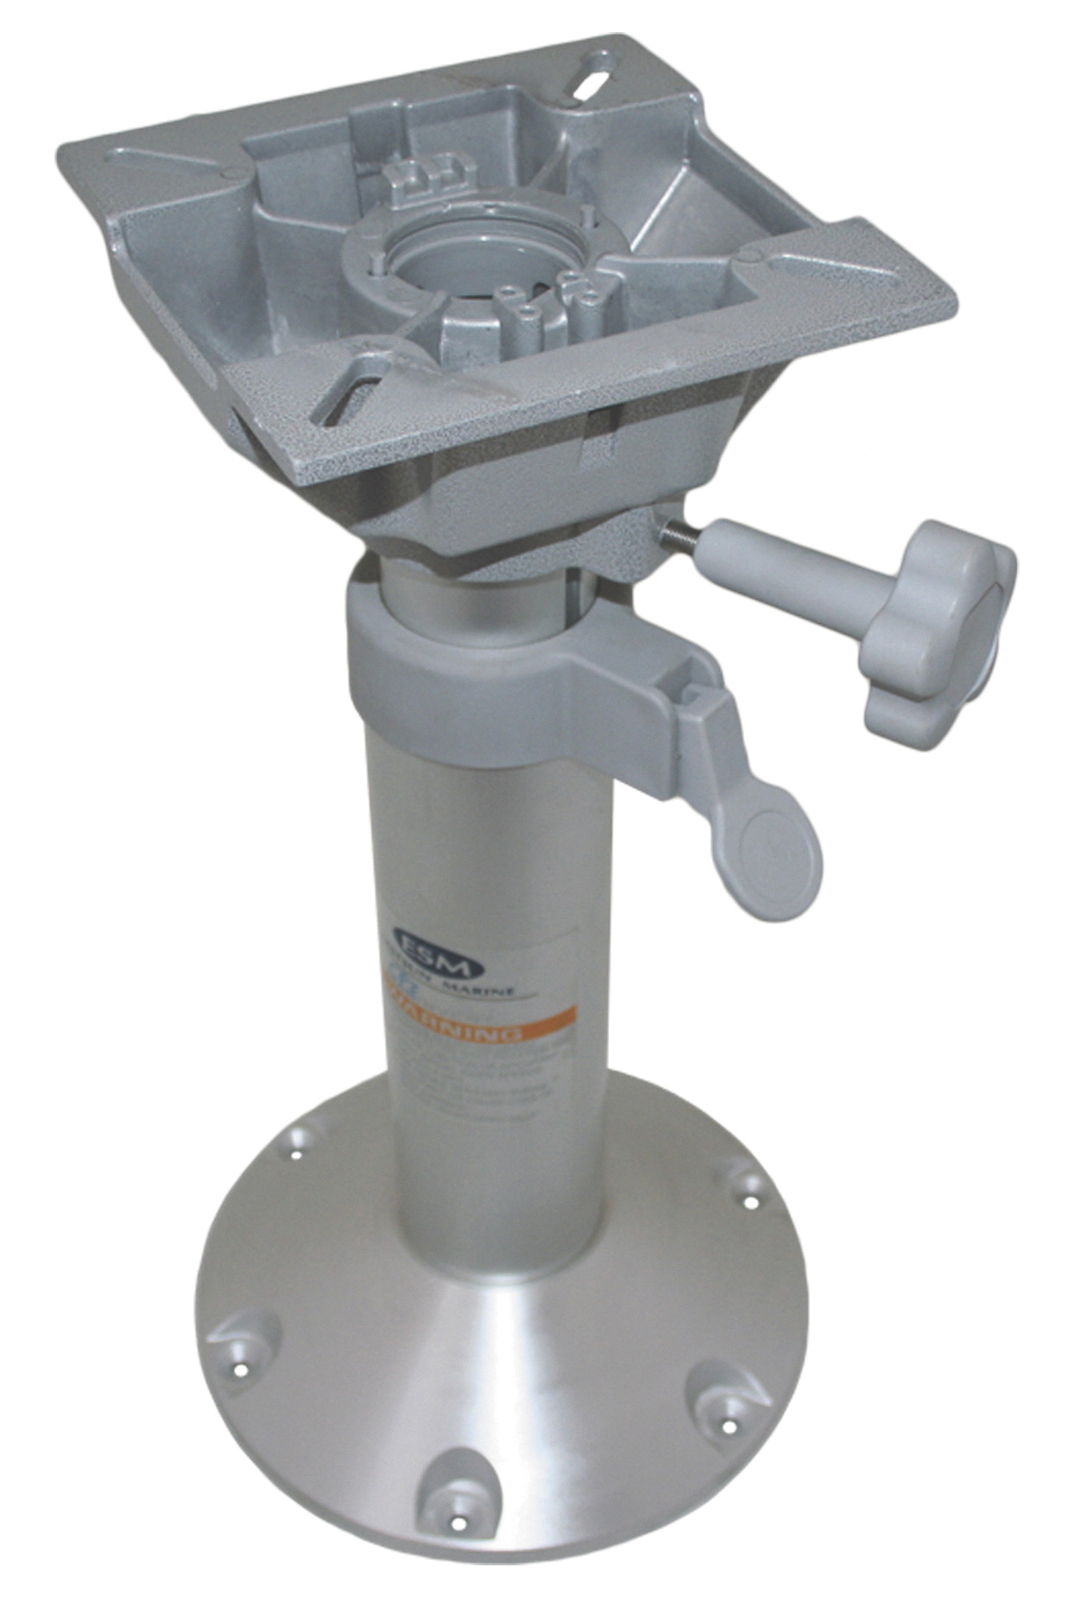 Seat Pedestal Adjustable With Swivel Top 415-635mm Height Adjustment